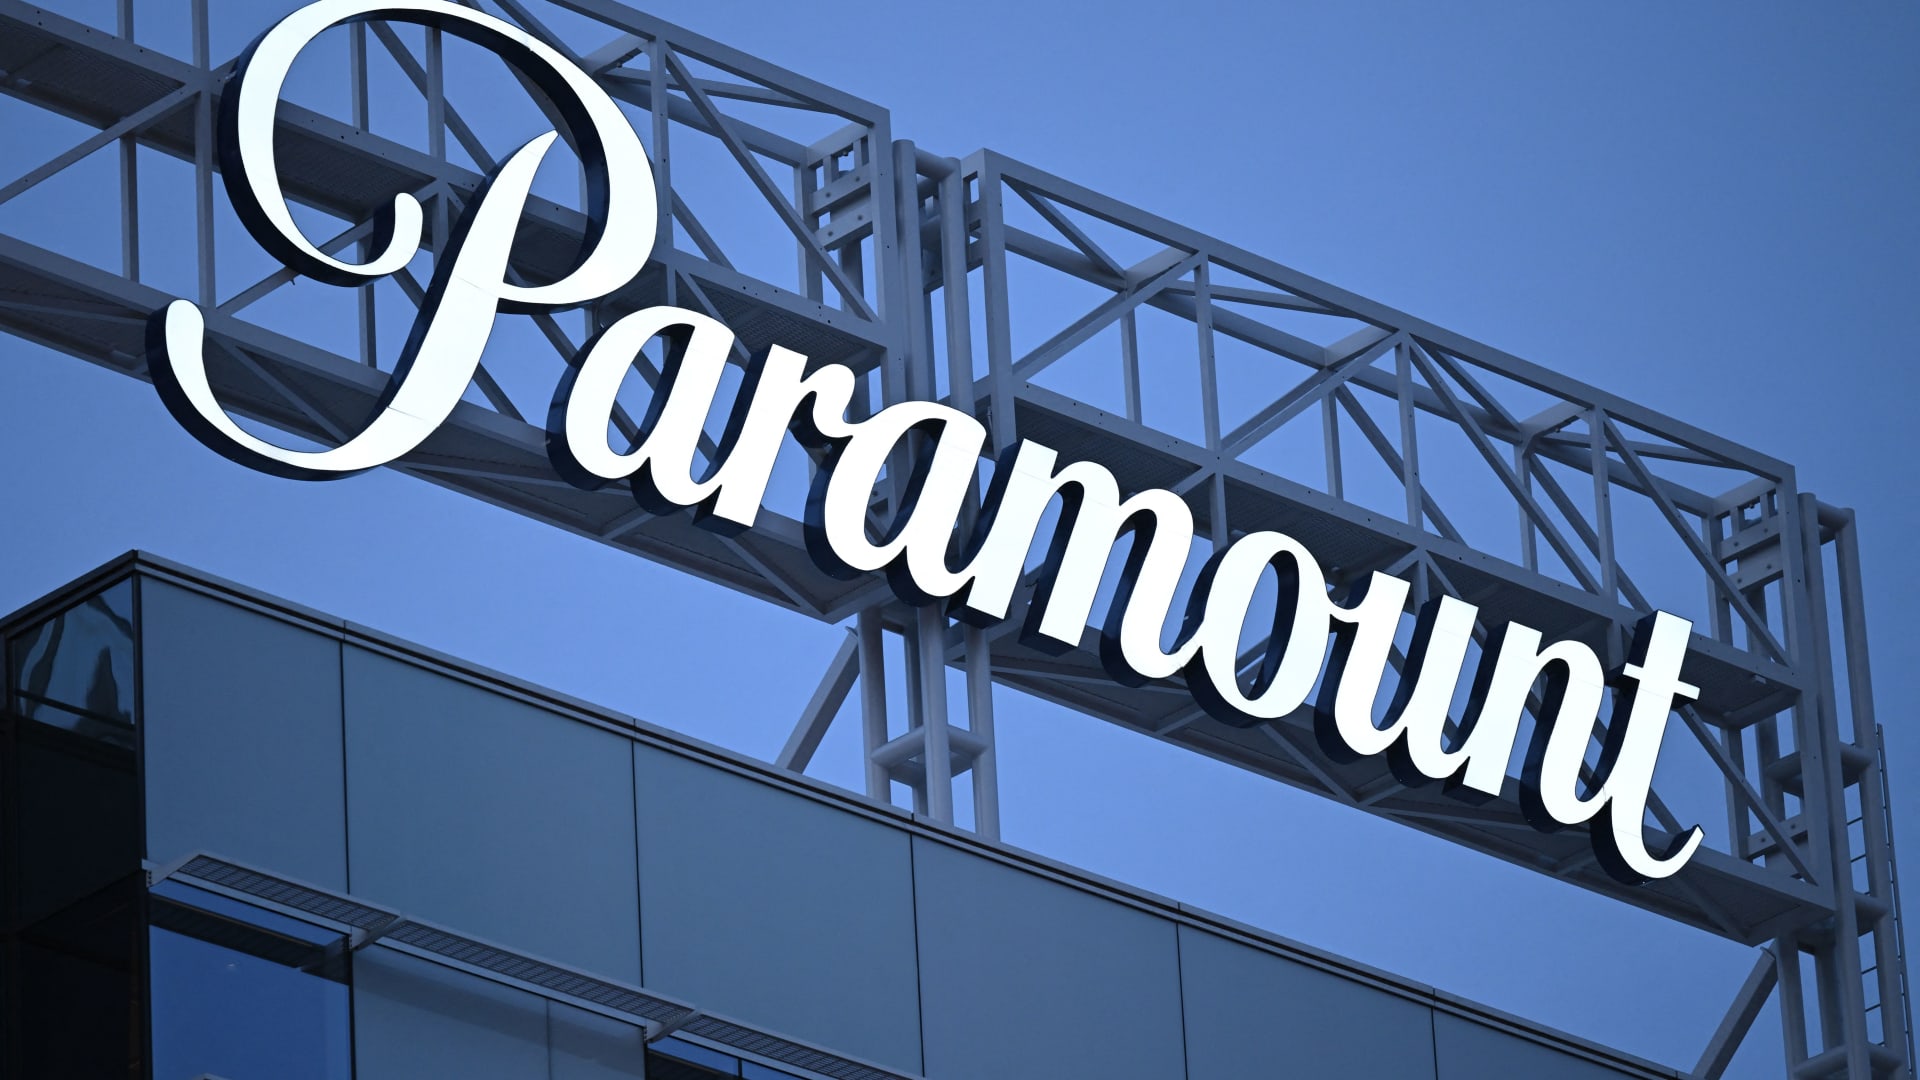 Stocks making the biggest moves before the bell: Paramount, PacWest, Shopify & more